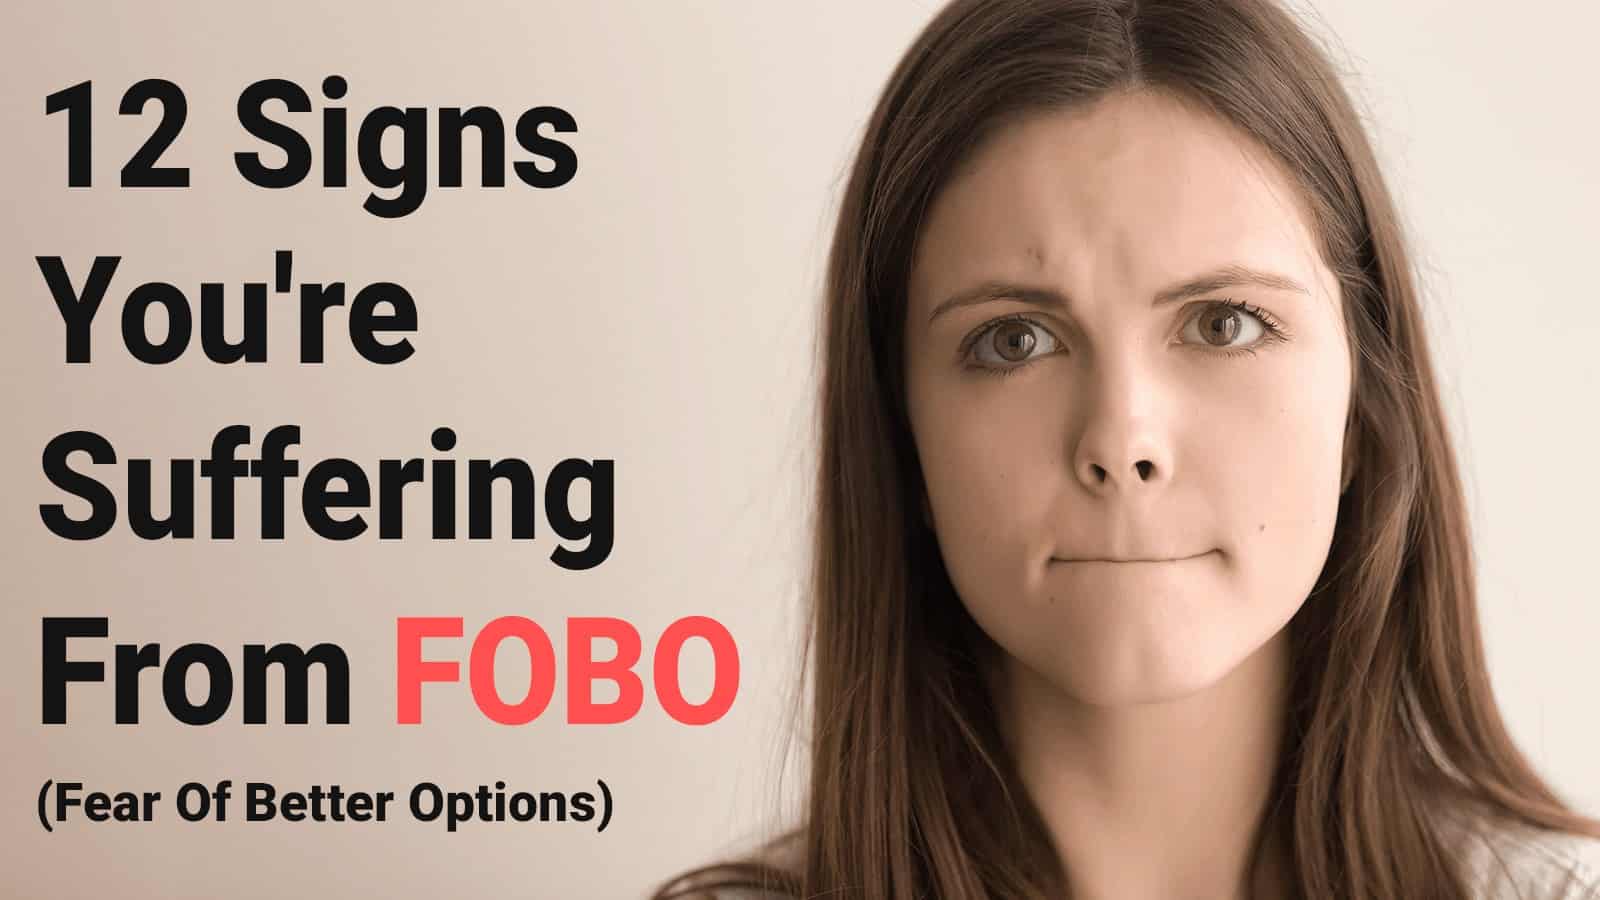 FOBO fear of better options